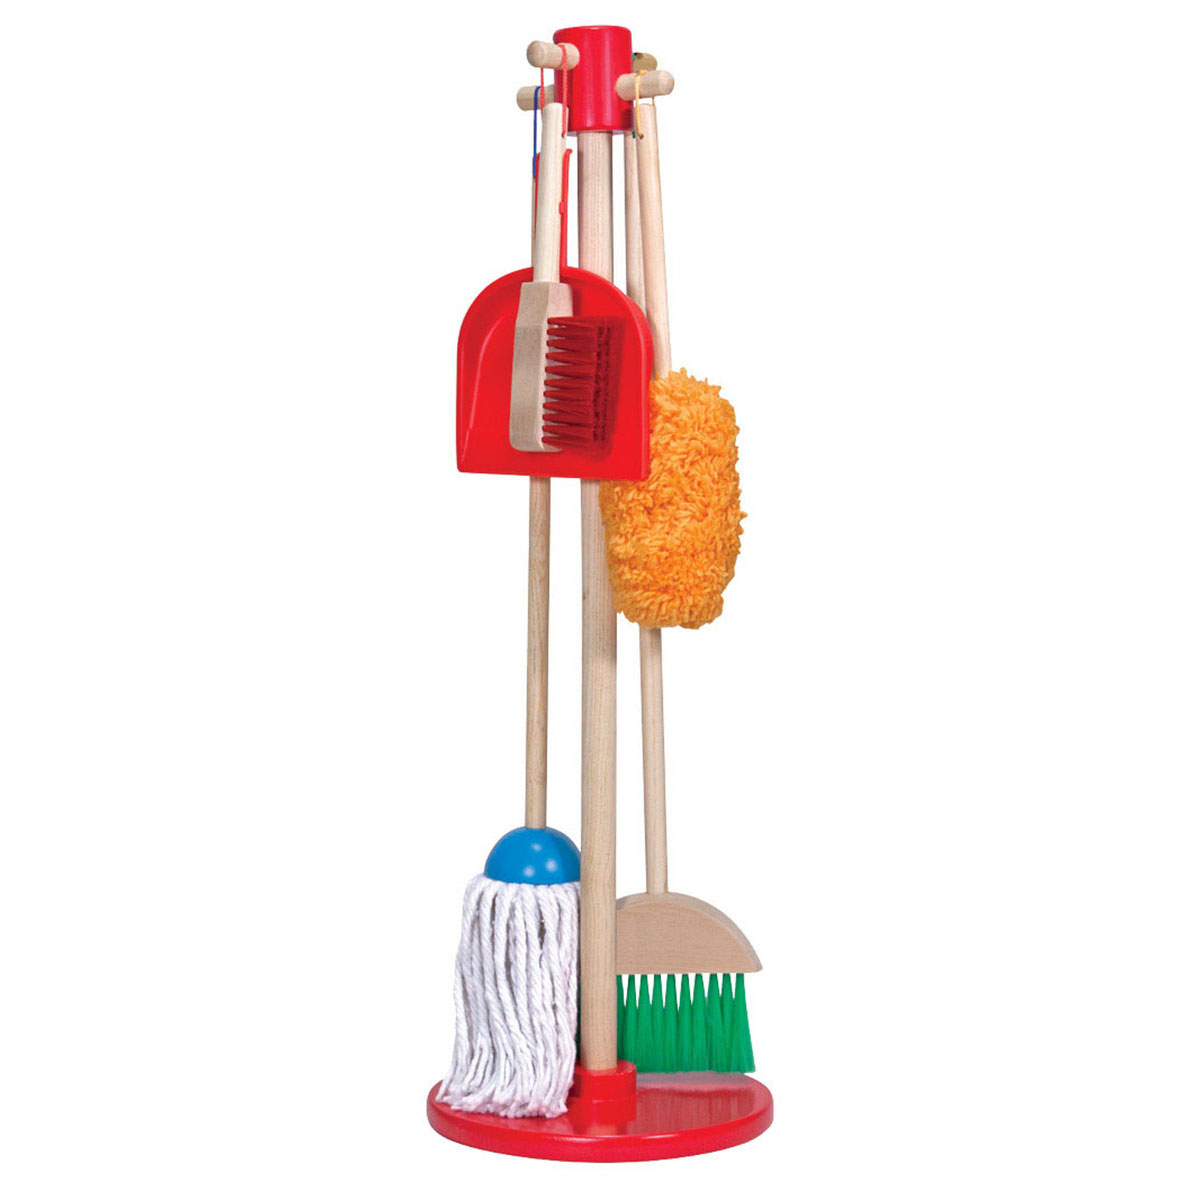  Let's Play House Dust, Sweep, Mop Set 